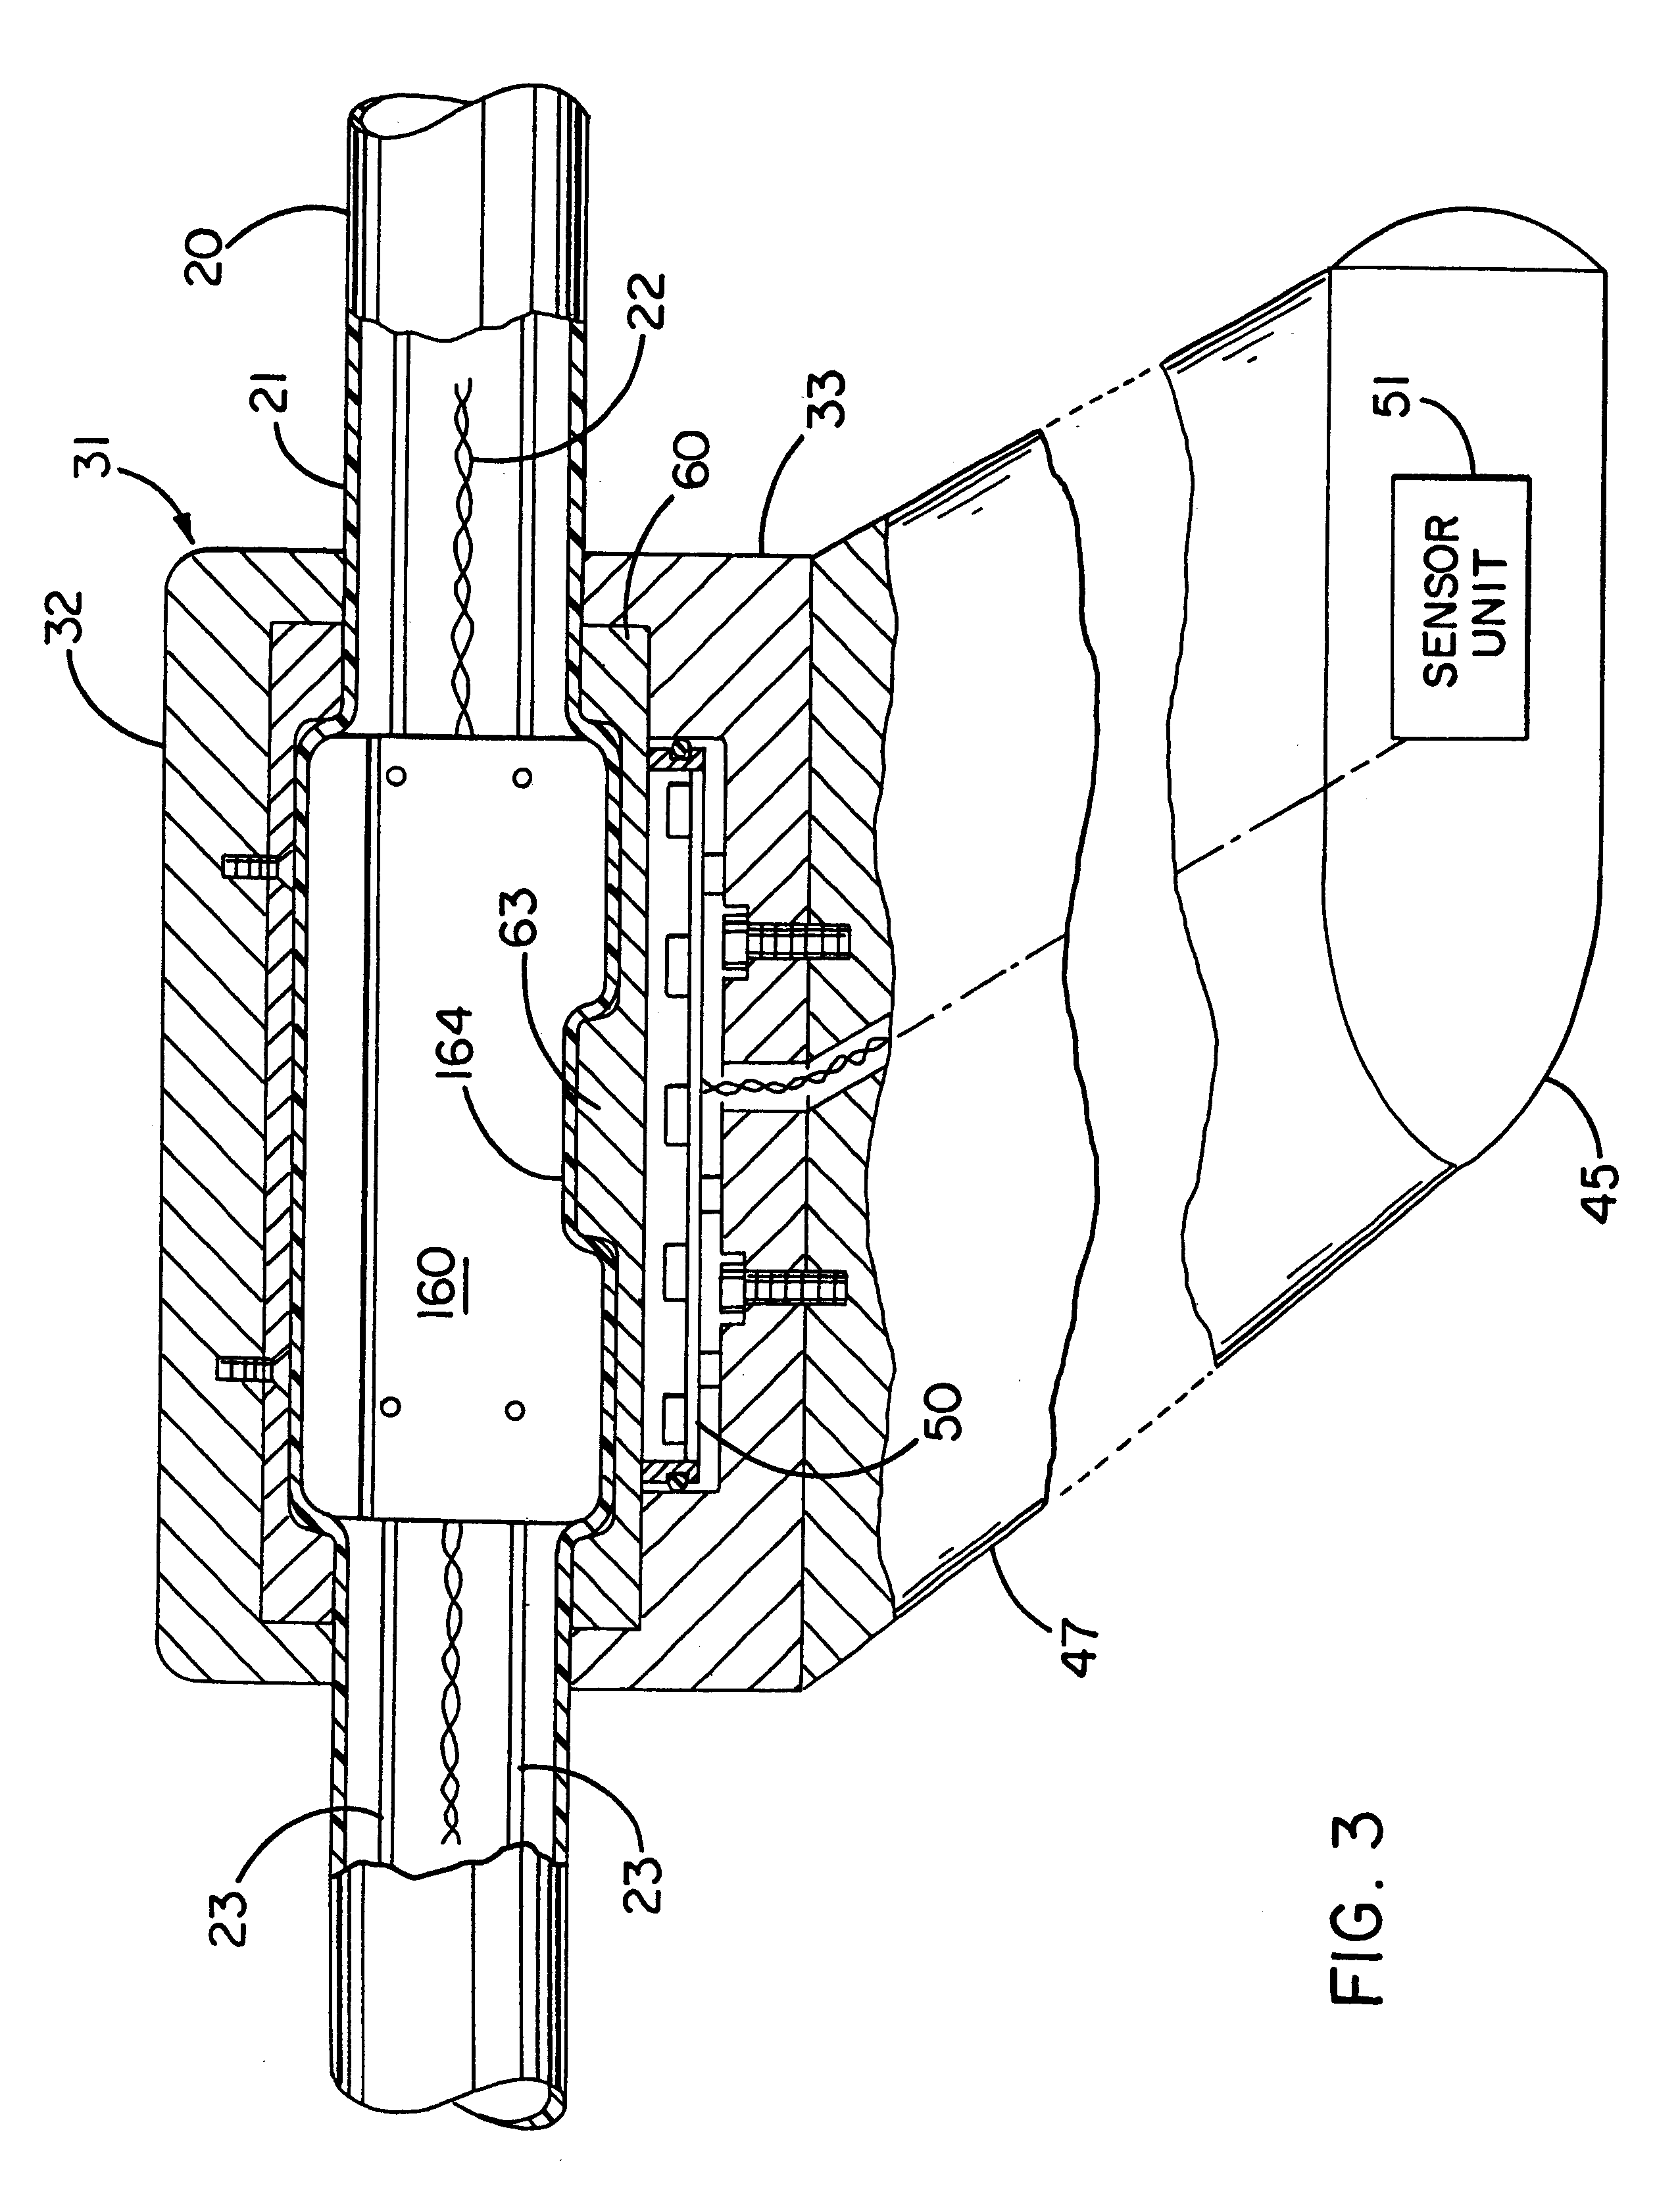 Devices for controlling the position of an underwater cable